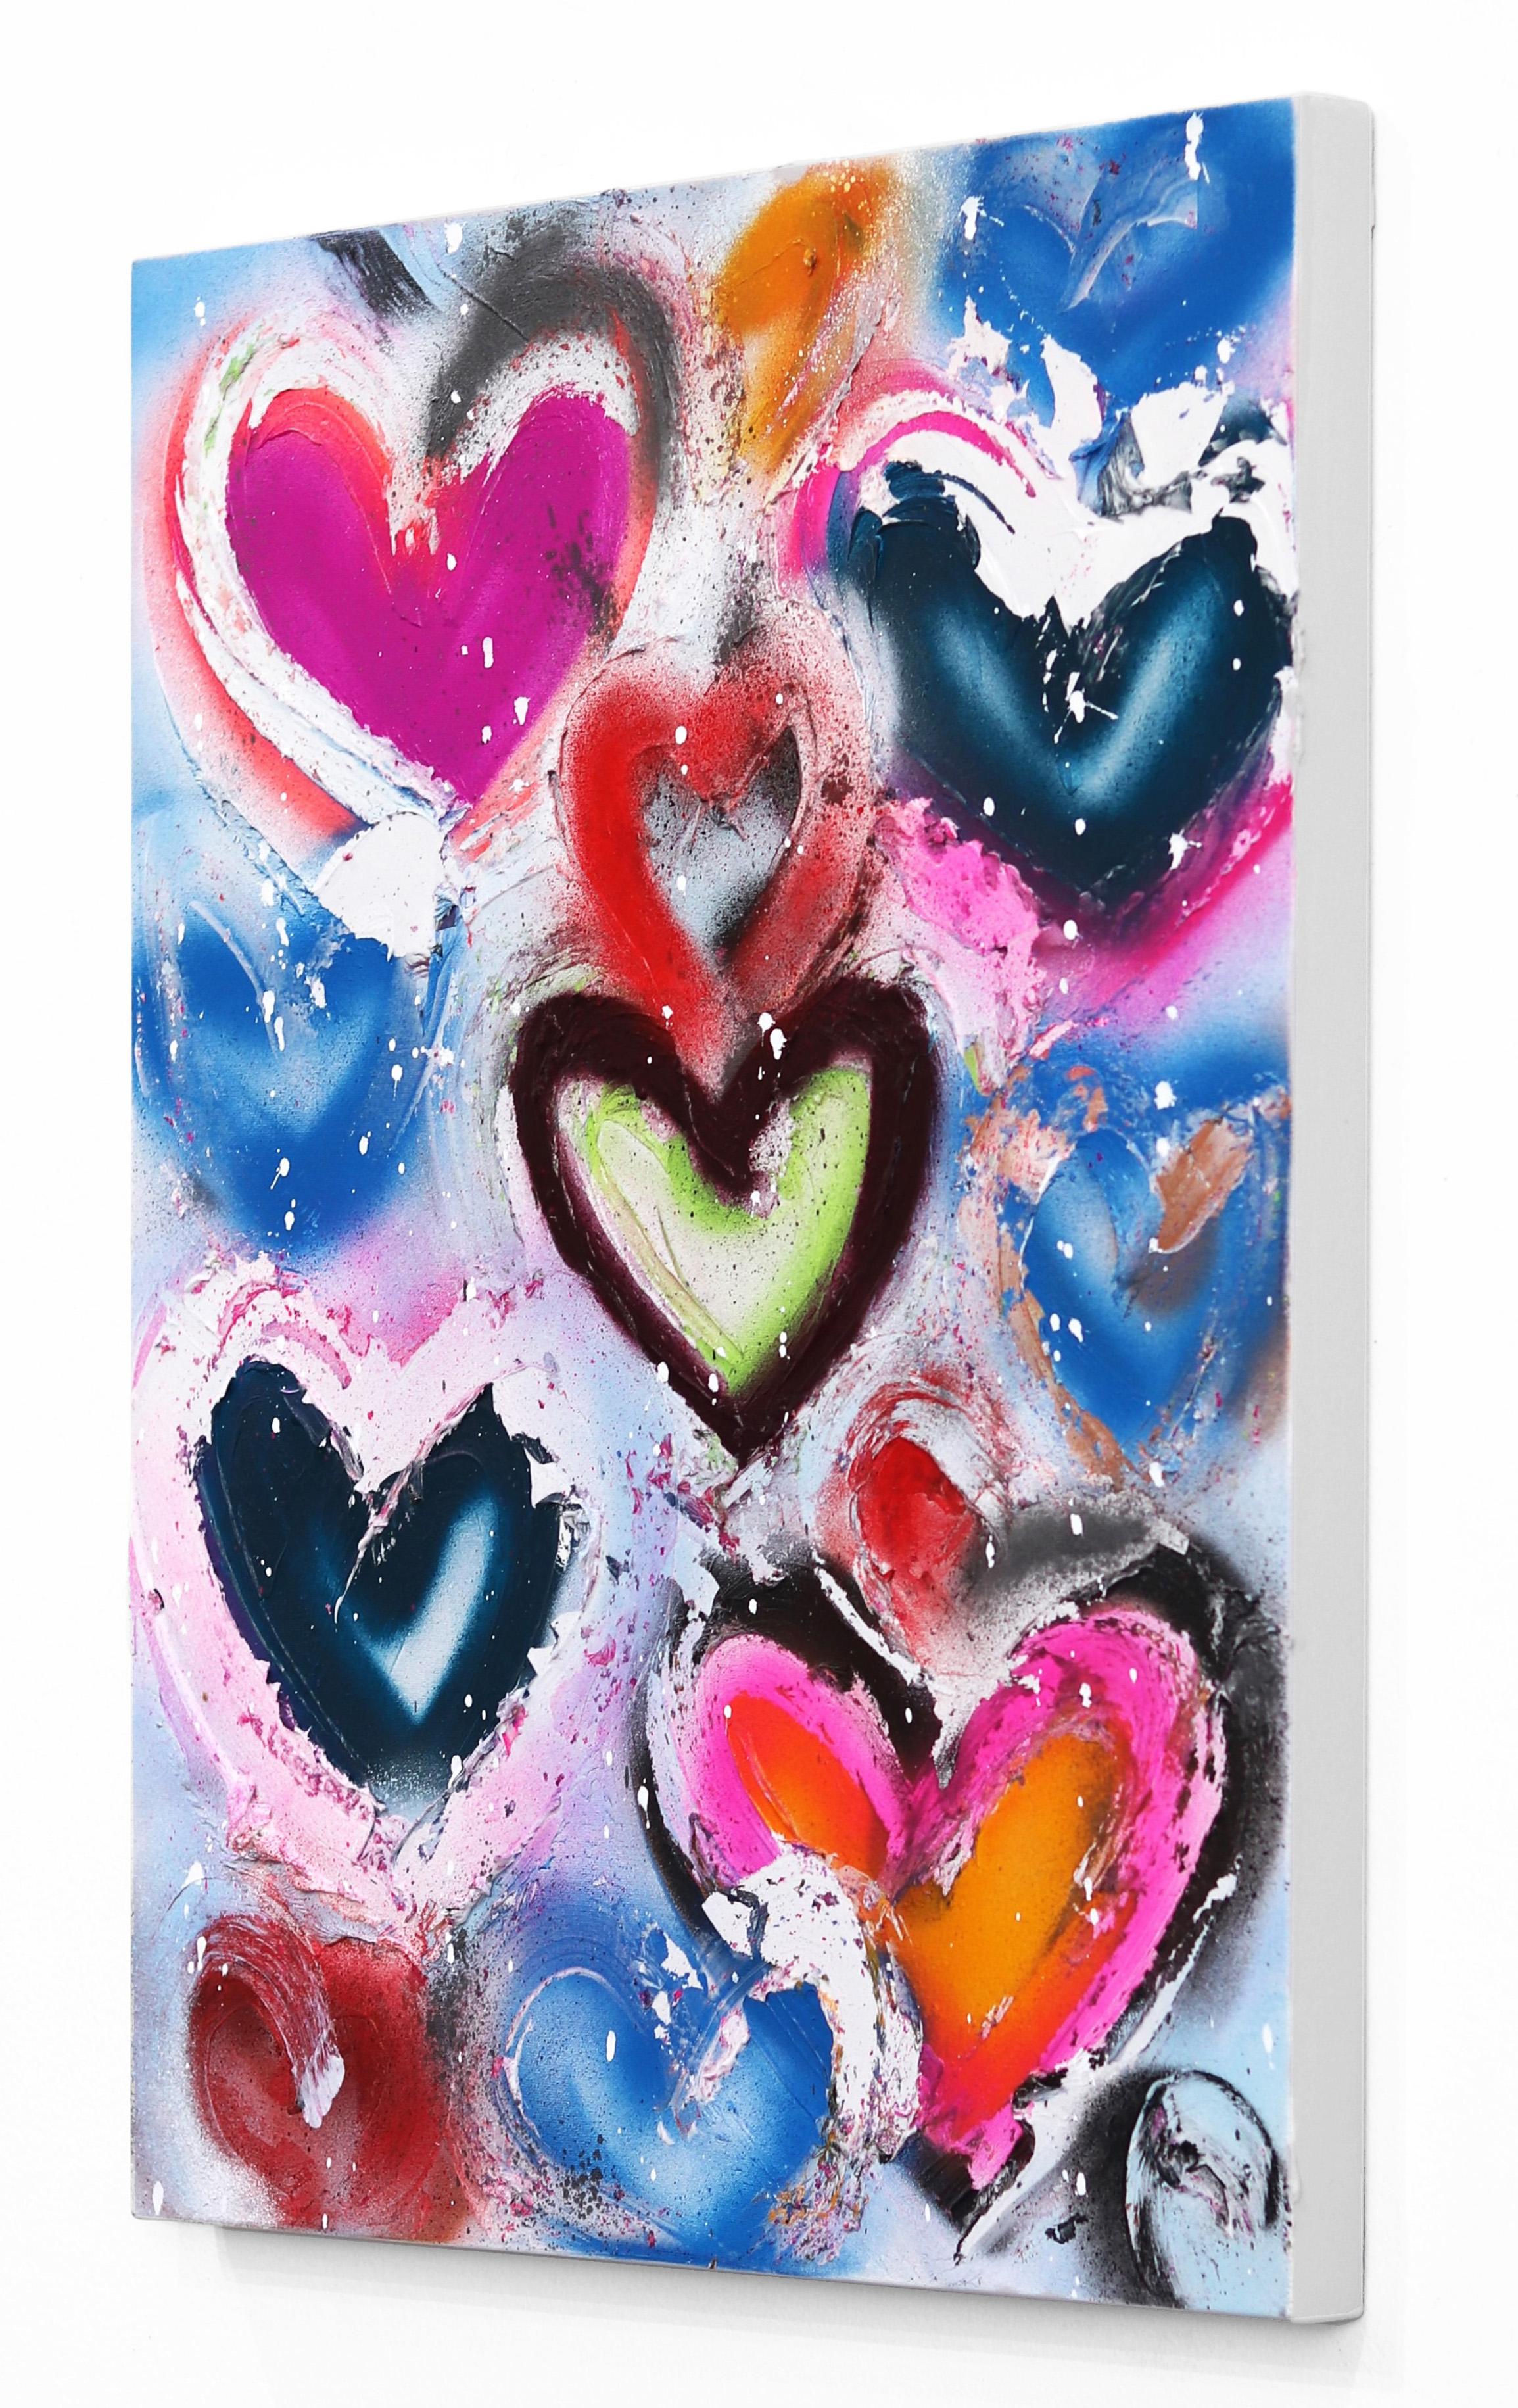 Heart Pounding Affection  - Street Art Painting by Amber Goldhammer